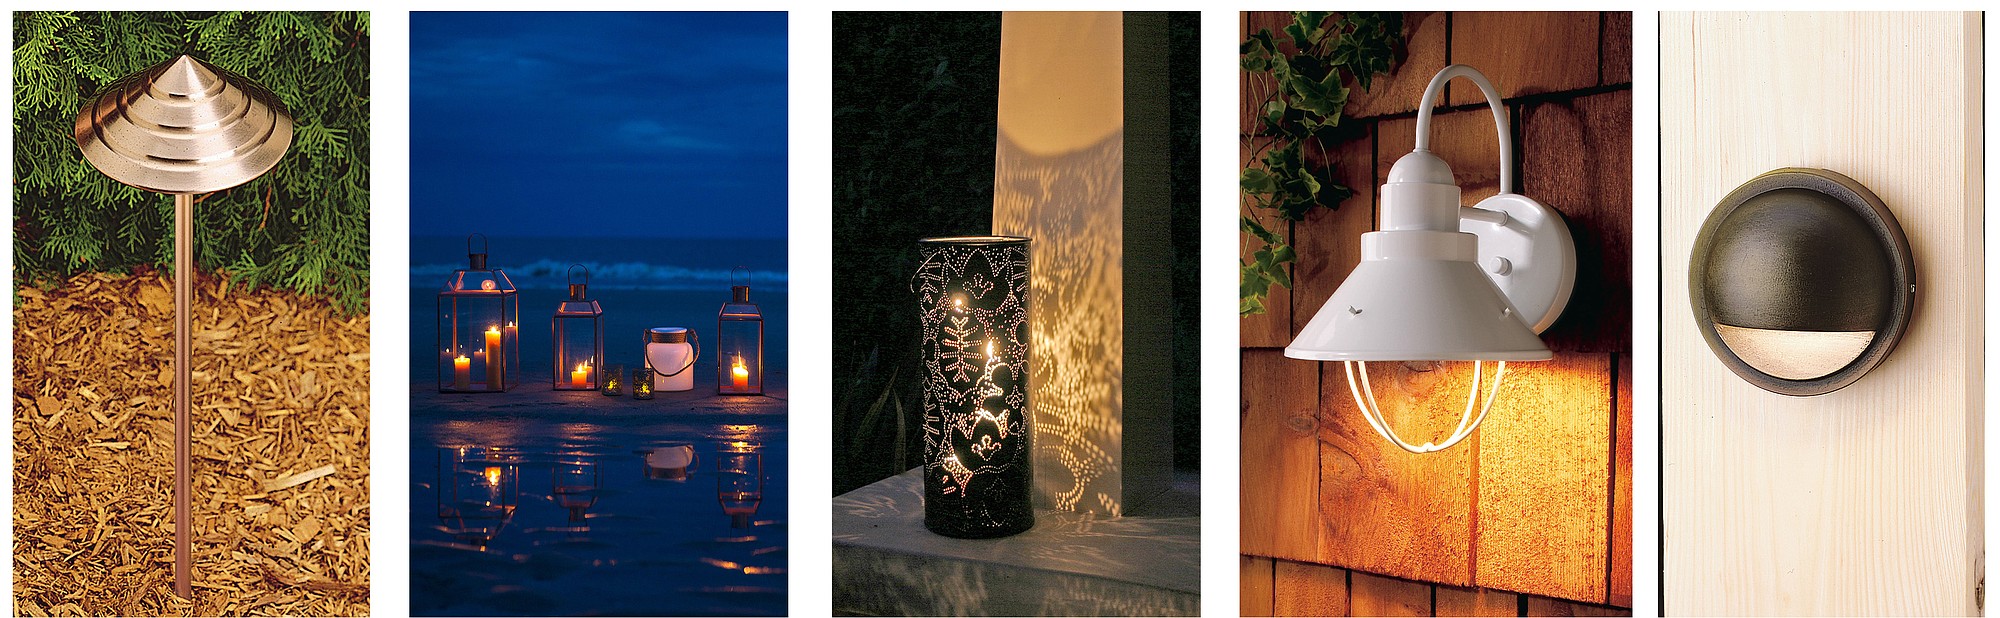 The Washington Post
Outdoor lighting can have a dramatic impact on landscaping. Some outdoor lighting options include, from left, Kichleru2019s copper path lights, Terrainu2019s copper Mansard lanterns, NotNeutralu2019s Season metal lantern, Plow &amp; Hearthu2019s Old Brooke light and Kichleru2019s cast-brass deck light.